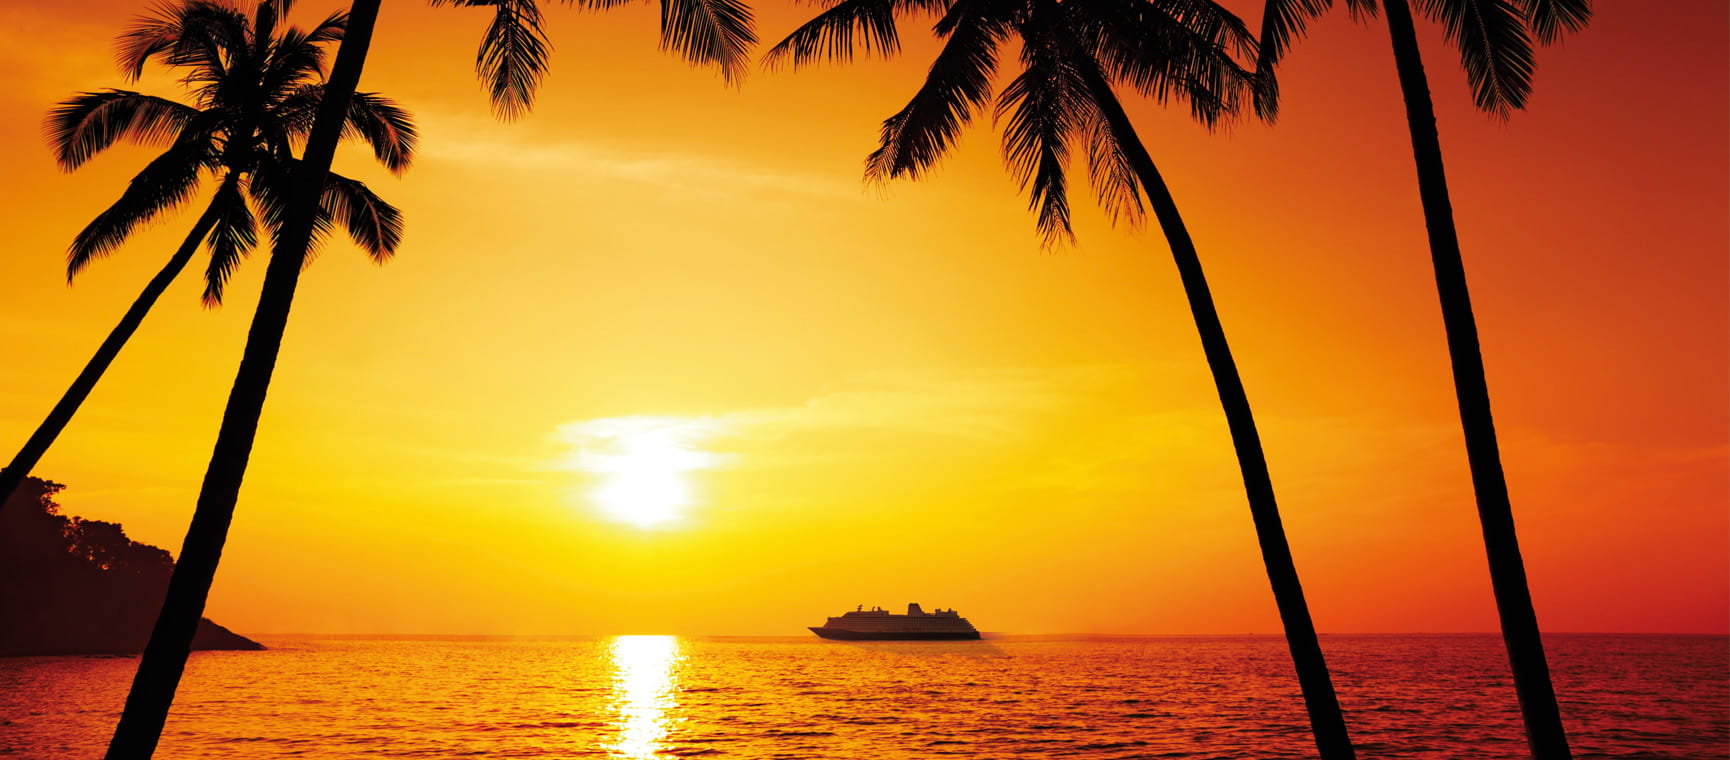 An orange sunset with palm trees over a bay with a cruise ship